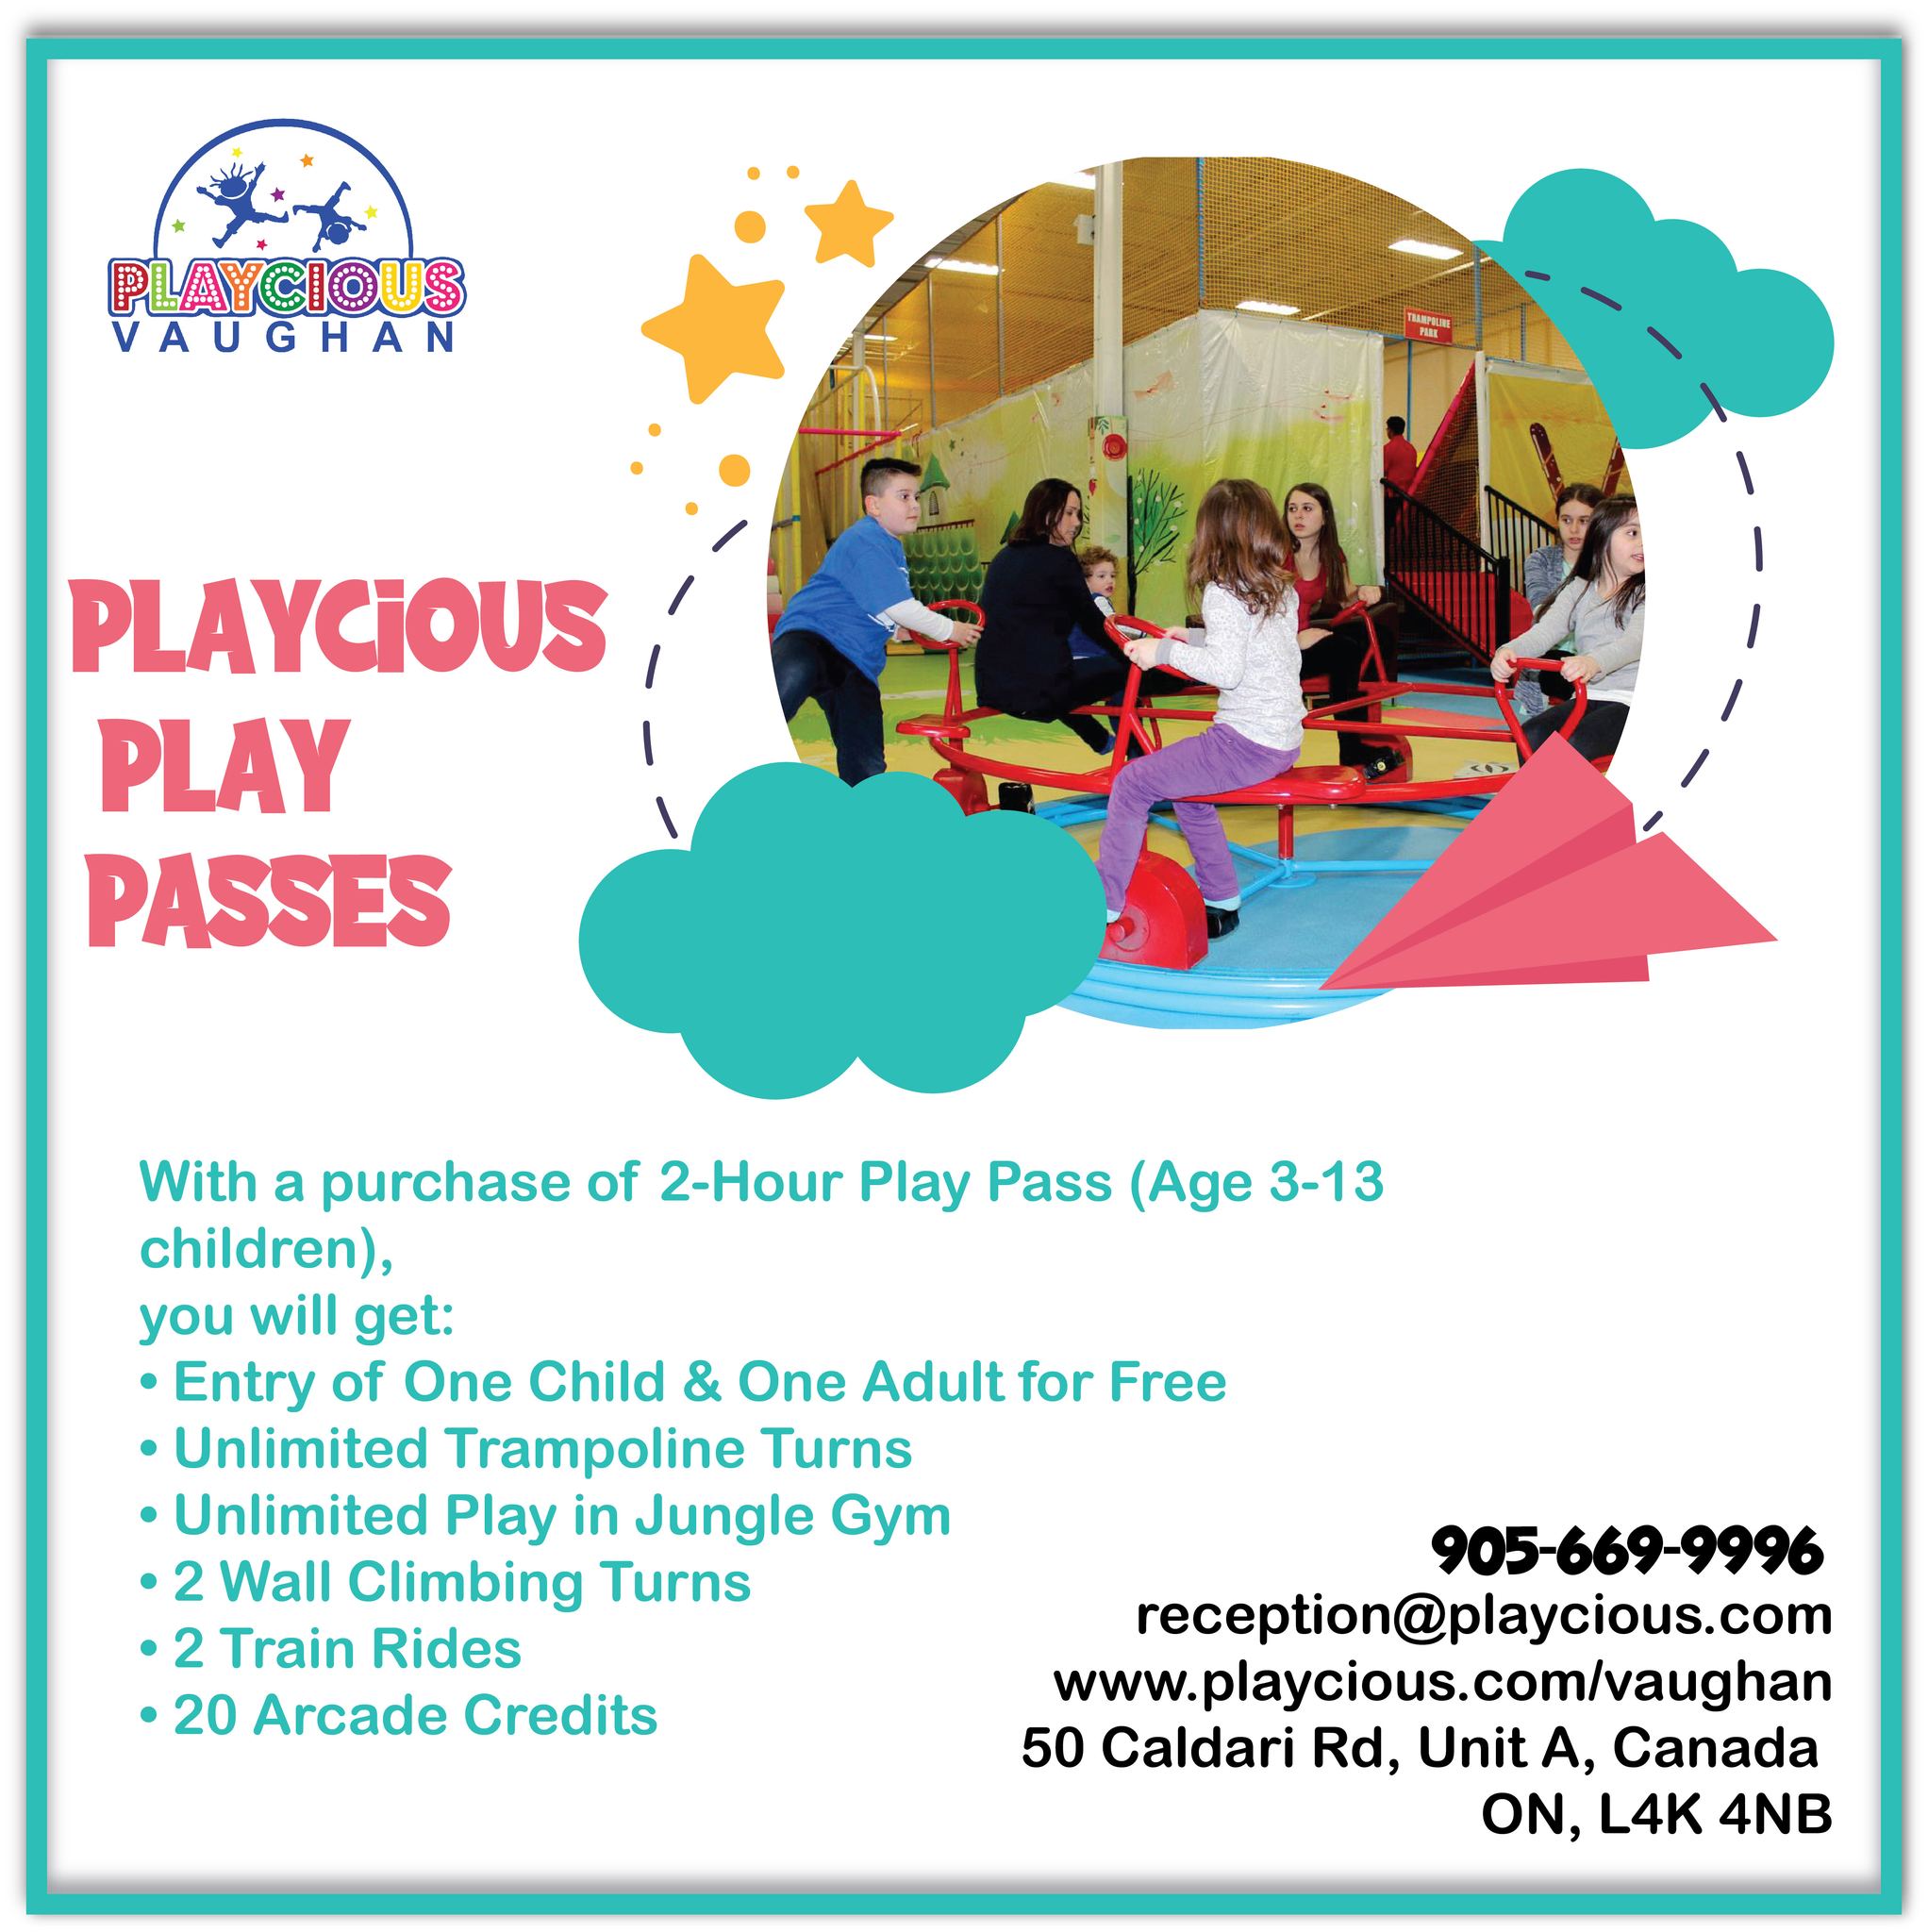 – Playcious Play Passes
With a purchase of 2-Hour Play Pass (Age 3-13 children),
you will get:
• Entry of One Child & One Adult for Free
• Unlimited Trampoline Turns
• Unlimited Play in Jungle Gym
• 2 Wall Climbing Turns
• 2 Train Rides
• 20 Arcade Credits

For detail, contact us at:
+1 905-669-9996
reception@playcious.com
www.playcious.com/vaughan
50 Caldari Rd, Unit A, Canada, ON, L4K 4N8

#playcious #vaughan #timetoplay #sanitize #club #celebration #birthdayparty #birthday #kidsactivitiesathome #toys #playtime #fun #playathome #kidsroomdecor #babyplayideas #babyactivities #kidsdevelopment #babyshop #kidsfashionblog #kidsplayground #playmat #kidplayground #kidsafe #play